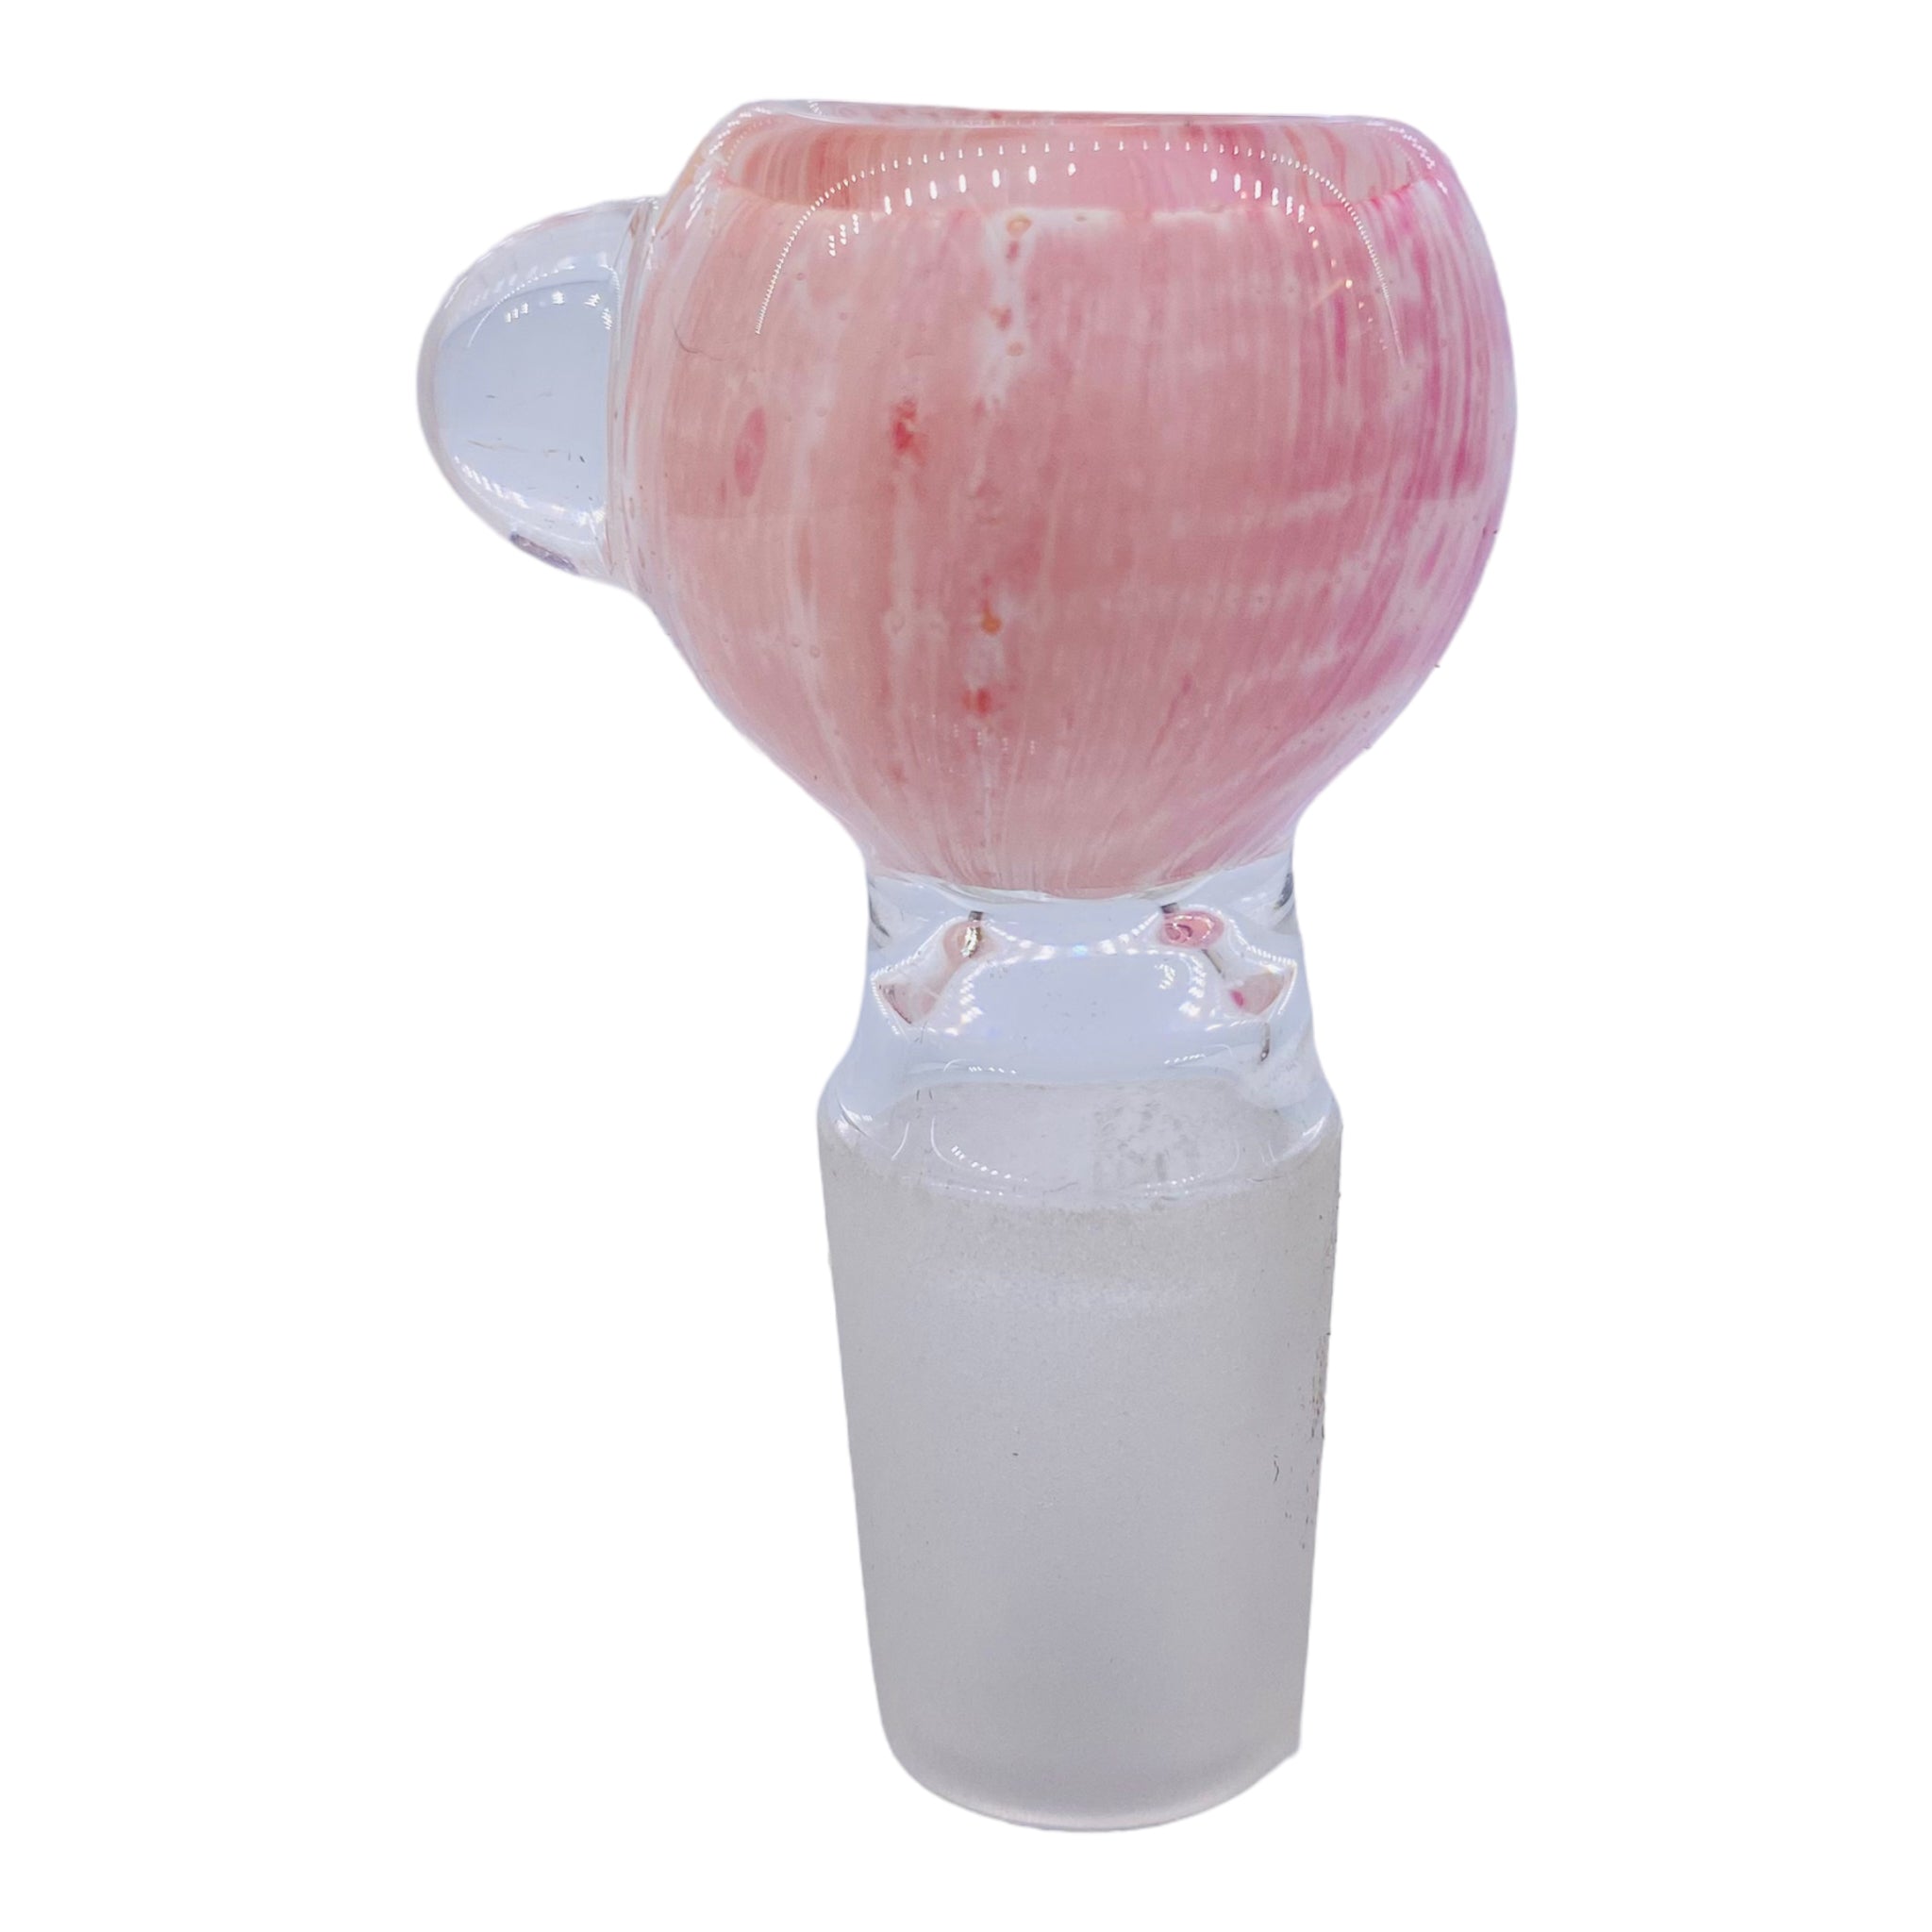 18mm Flower Bowl - Pink And White Basic Bubble Bong Bowl Piece